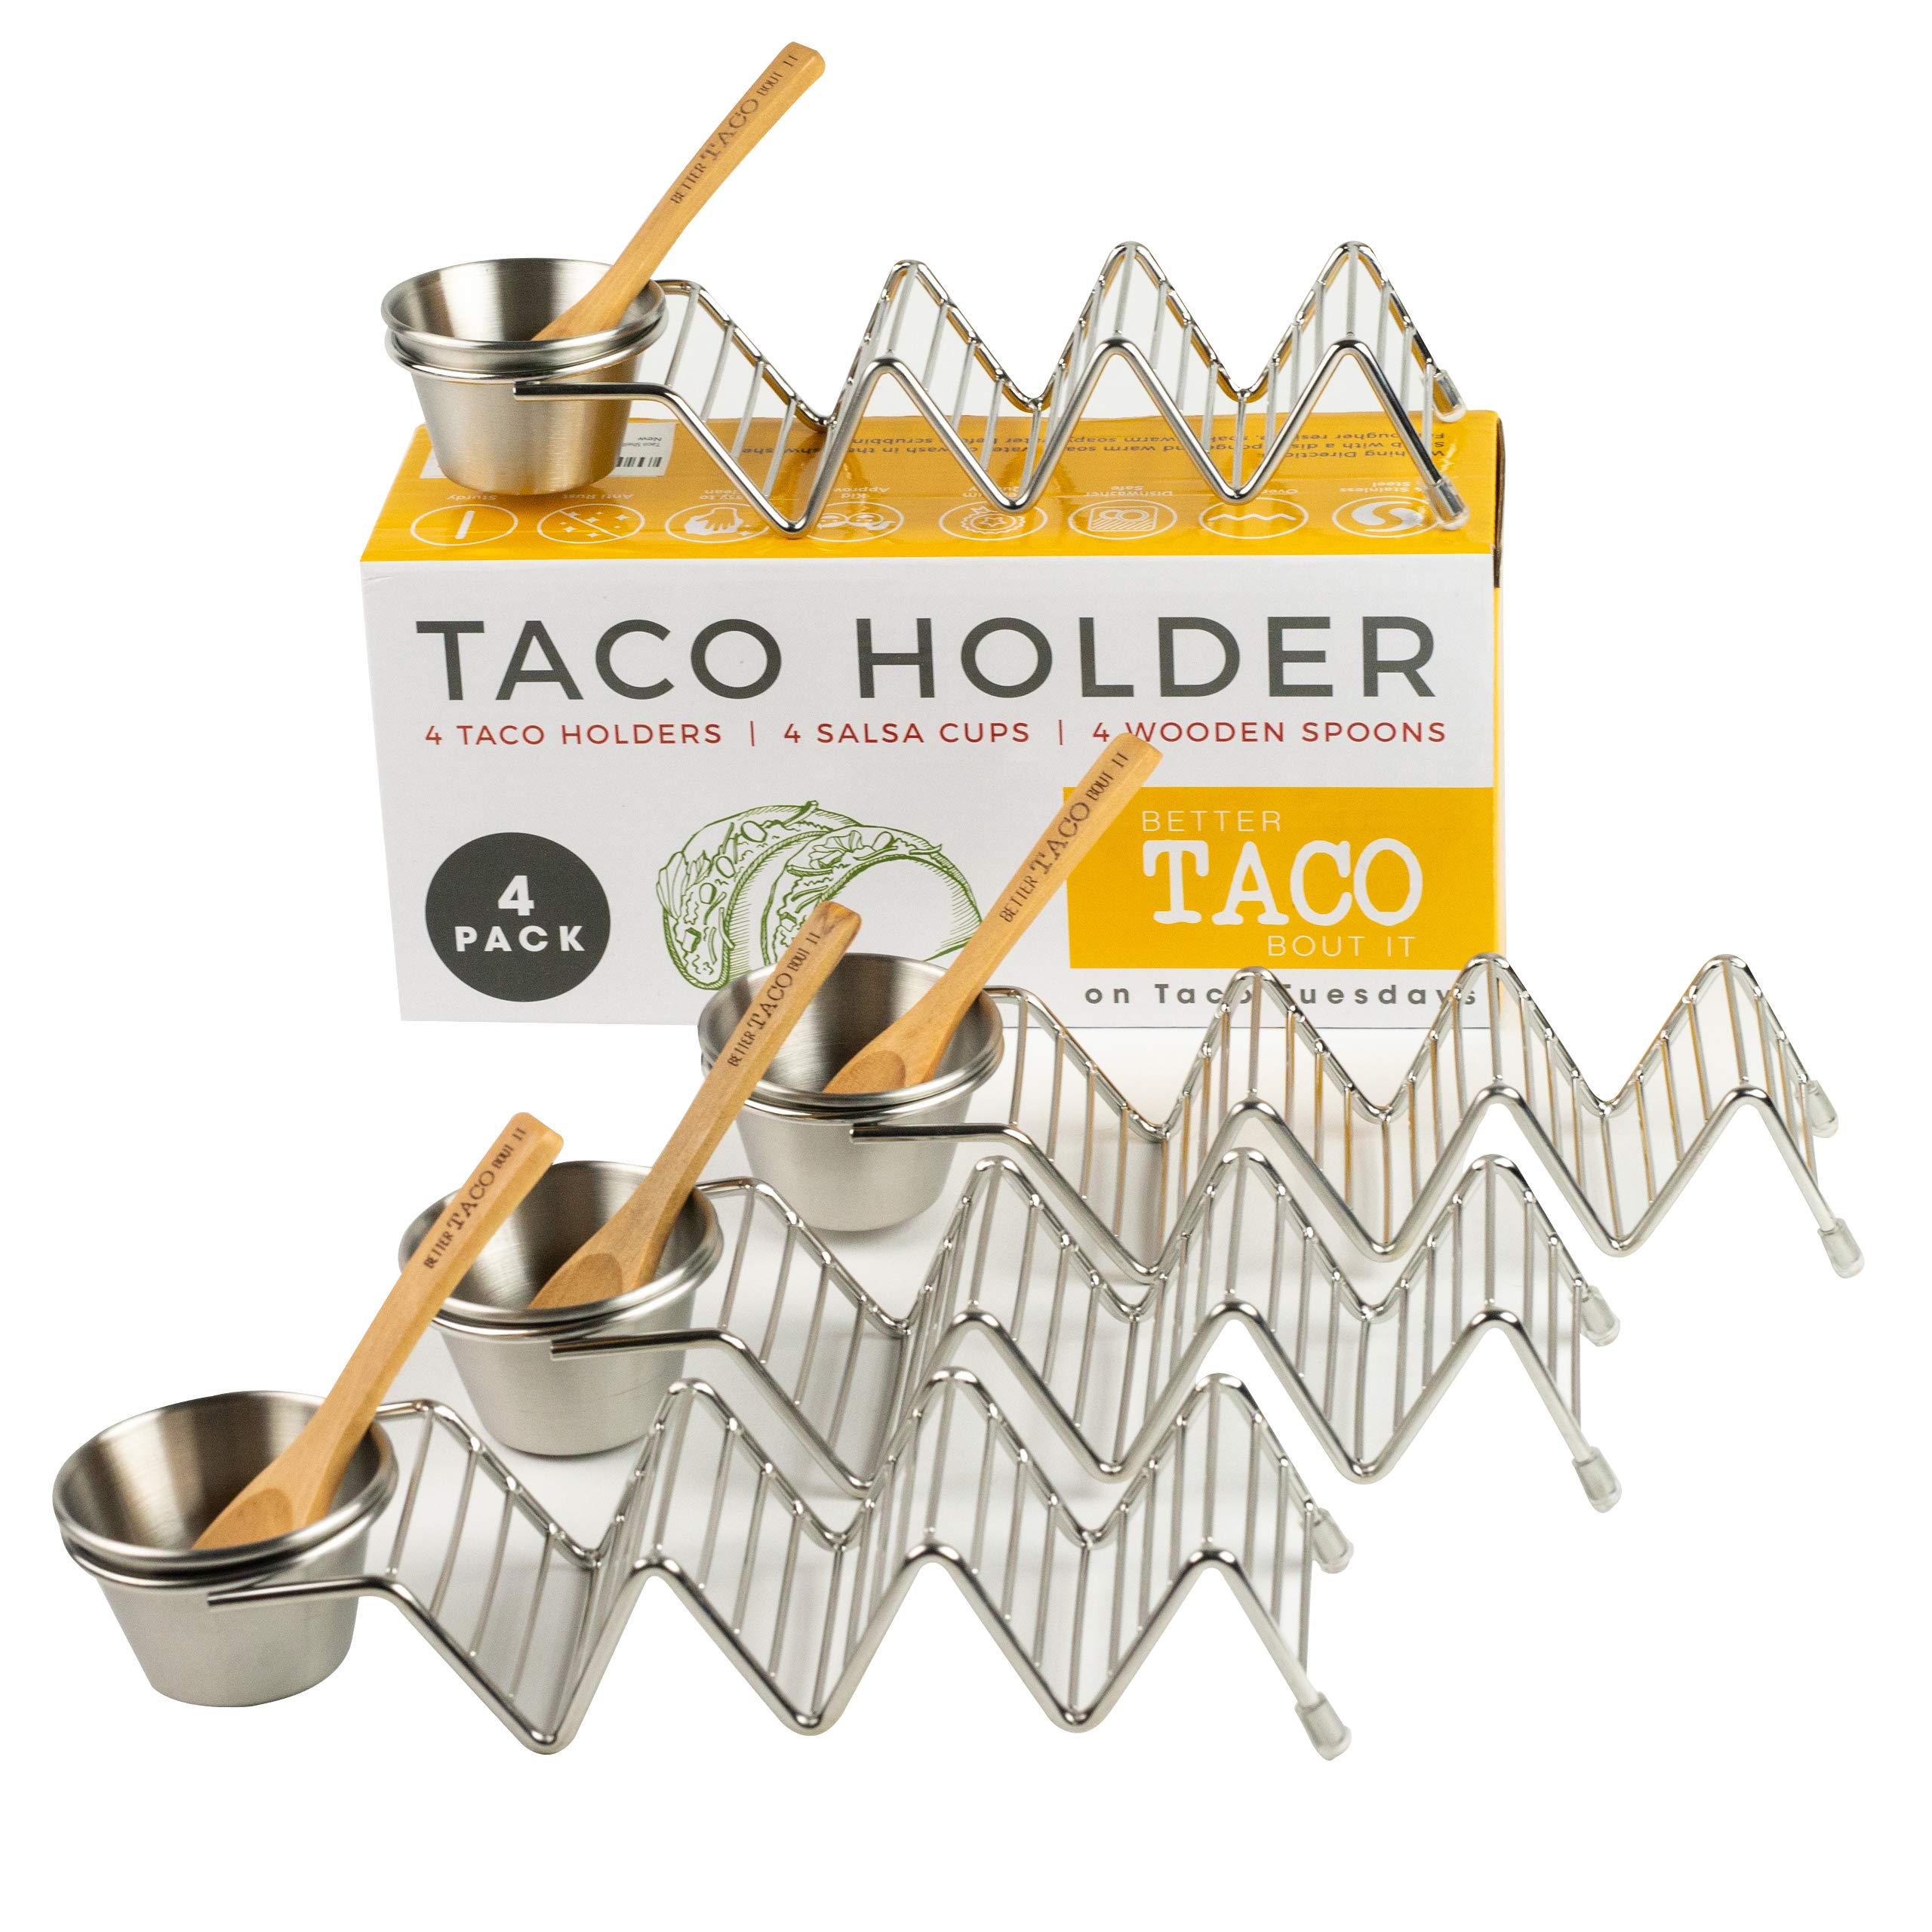 Book Cover Taco Shell Stand Up Holders - 4 Pack Premium Stainless Steel Oven, Dishwasher Safe Taco Holder, Holds 3 Tacos Each Keeping Shells Neat and Upright, Also Comes With 4 Salsa Cups and 4 Wooden Spoons